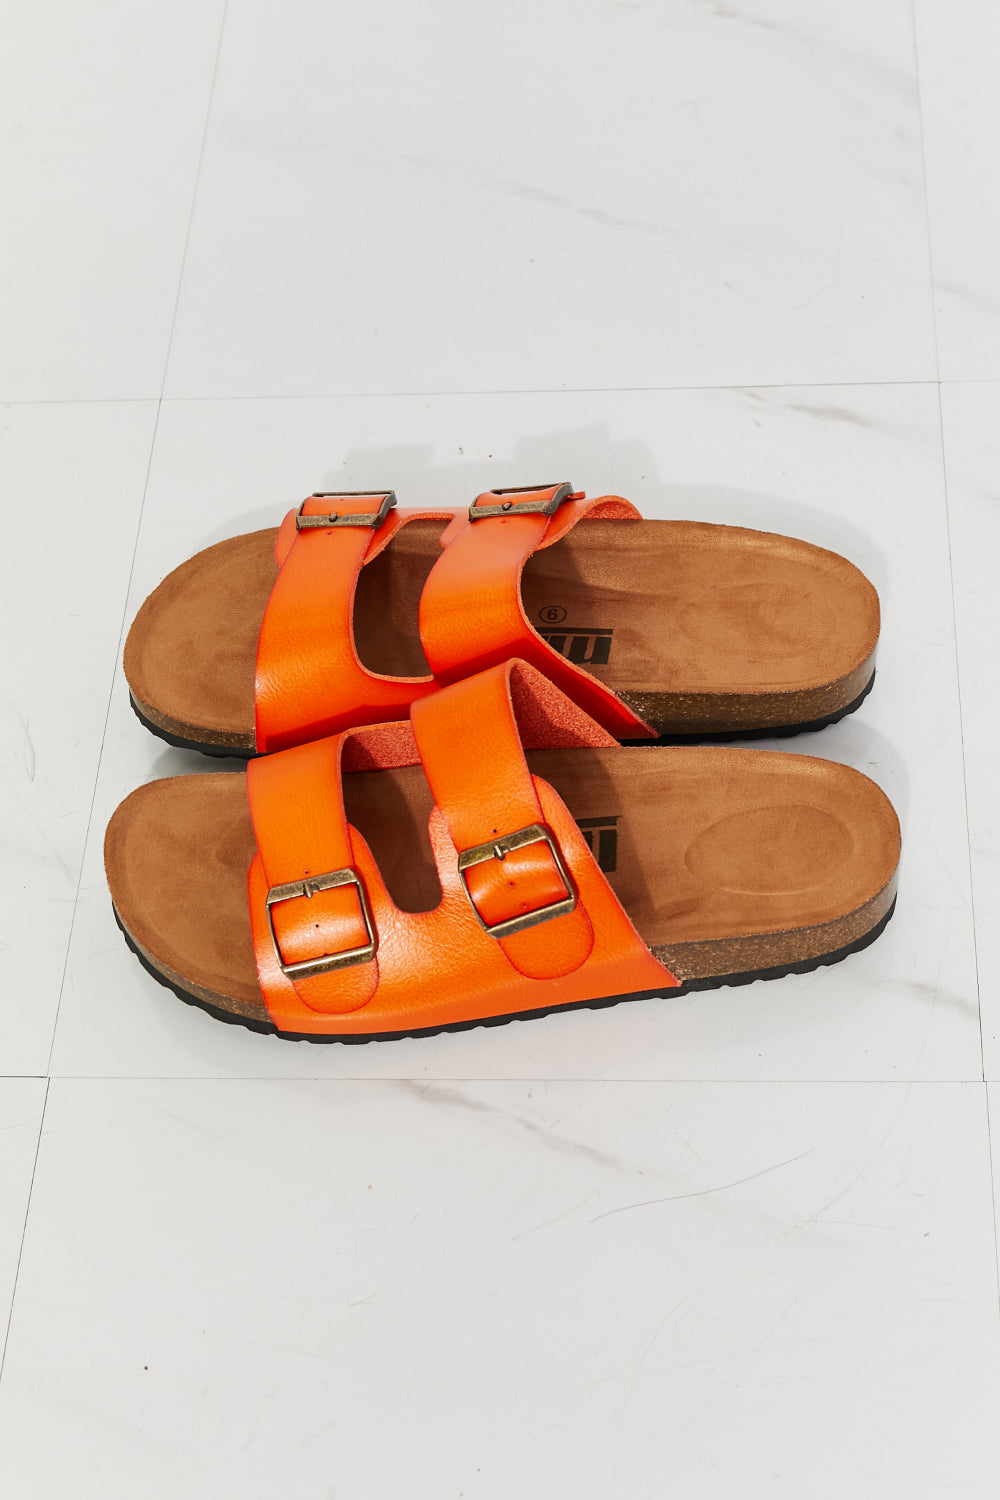 MMShoes Feeling Alive Double Banded Slide Sandals in Orange Print on any thing USA/STOD clothes